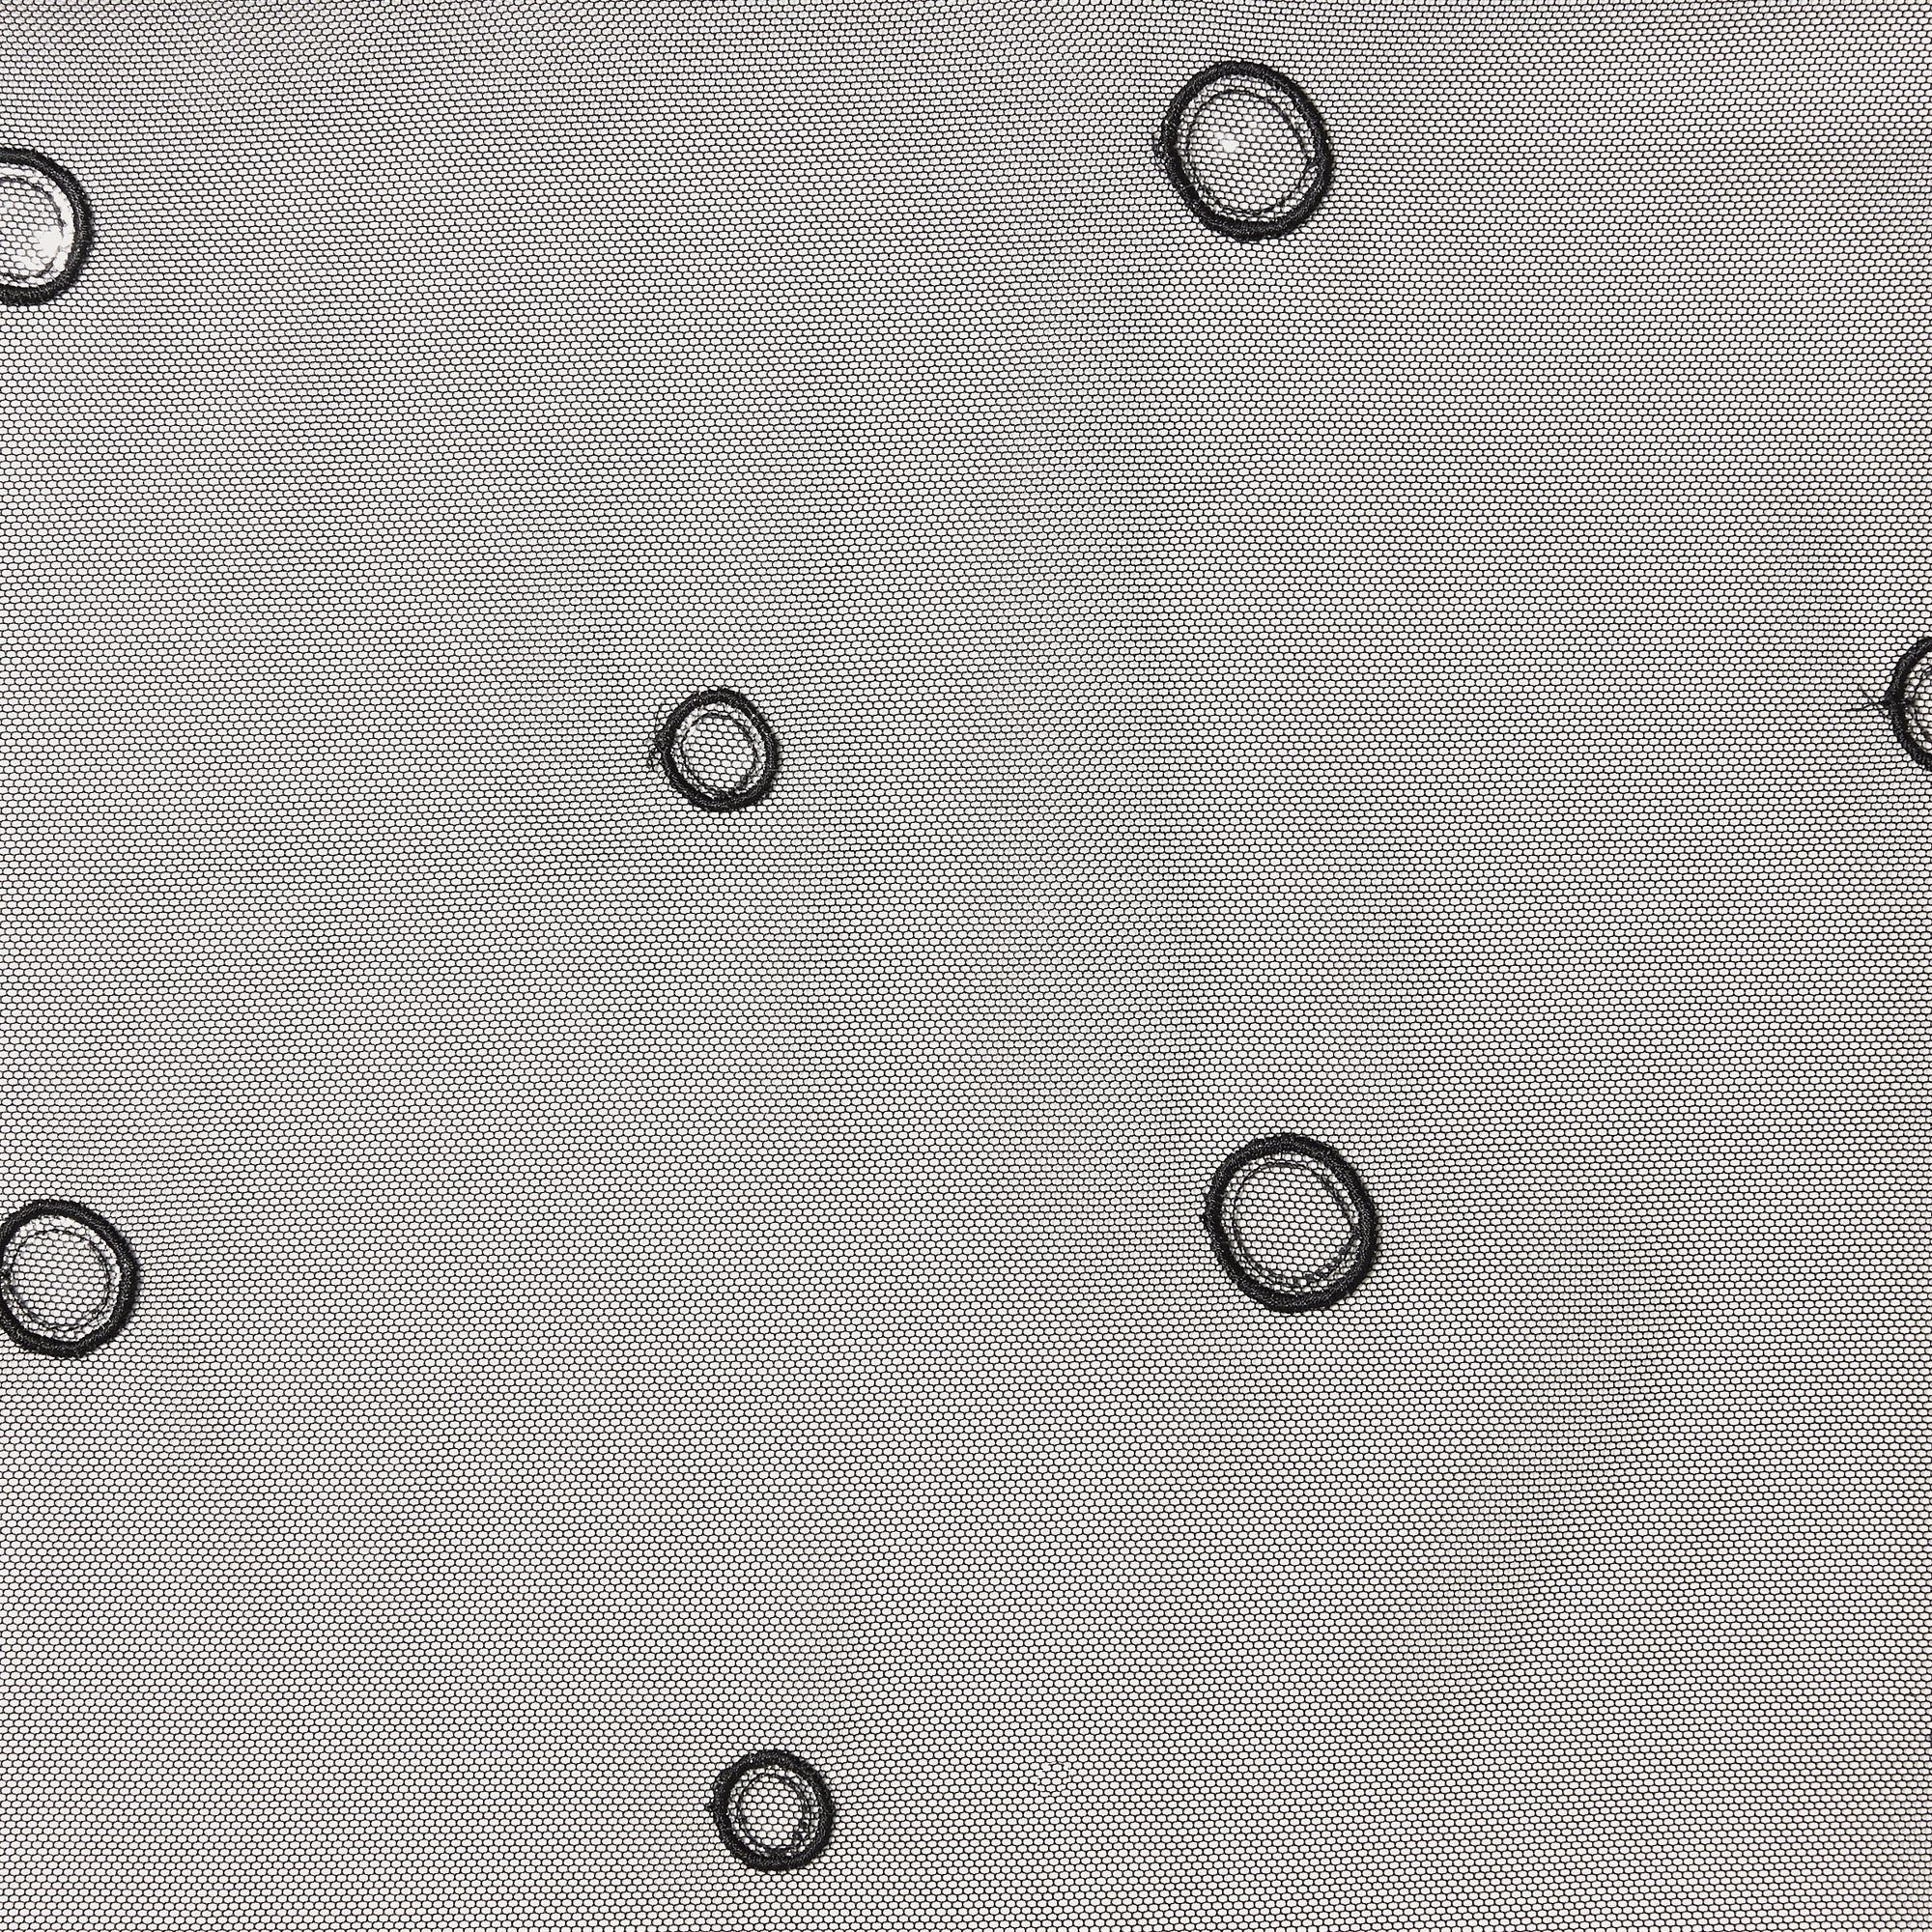 evolve displaying black embroidered circles and spots on black mesh nylon rayon blend